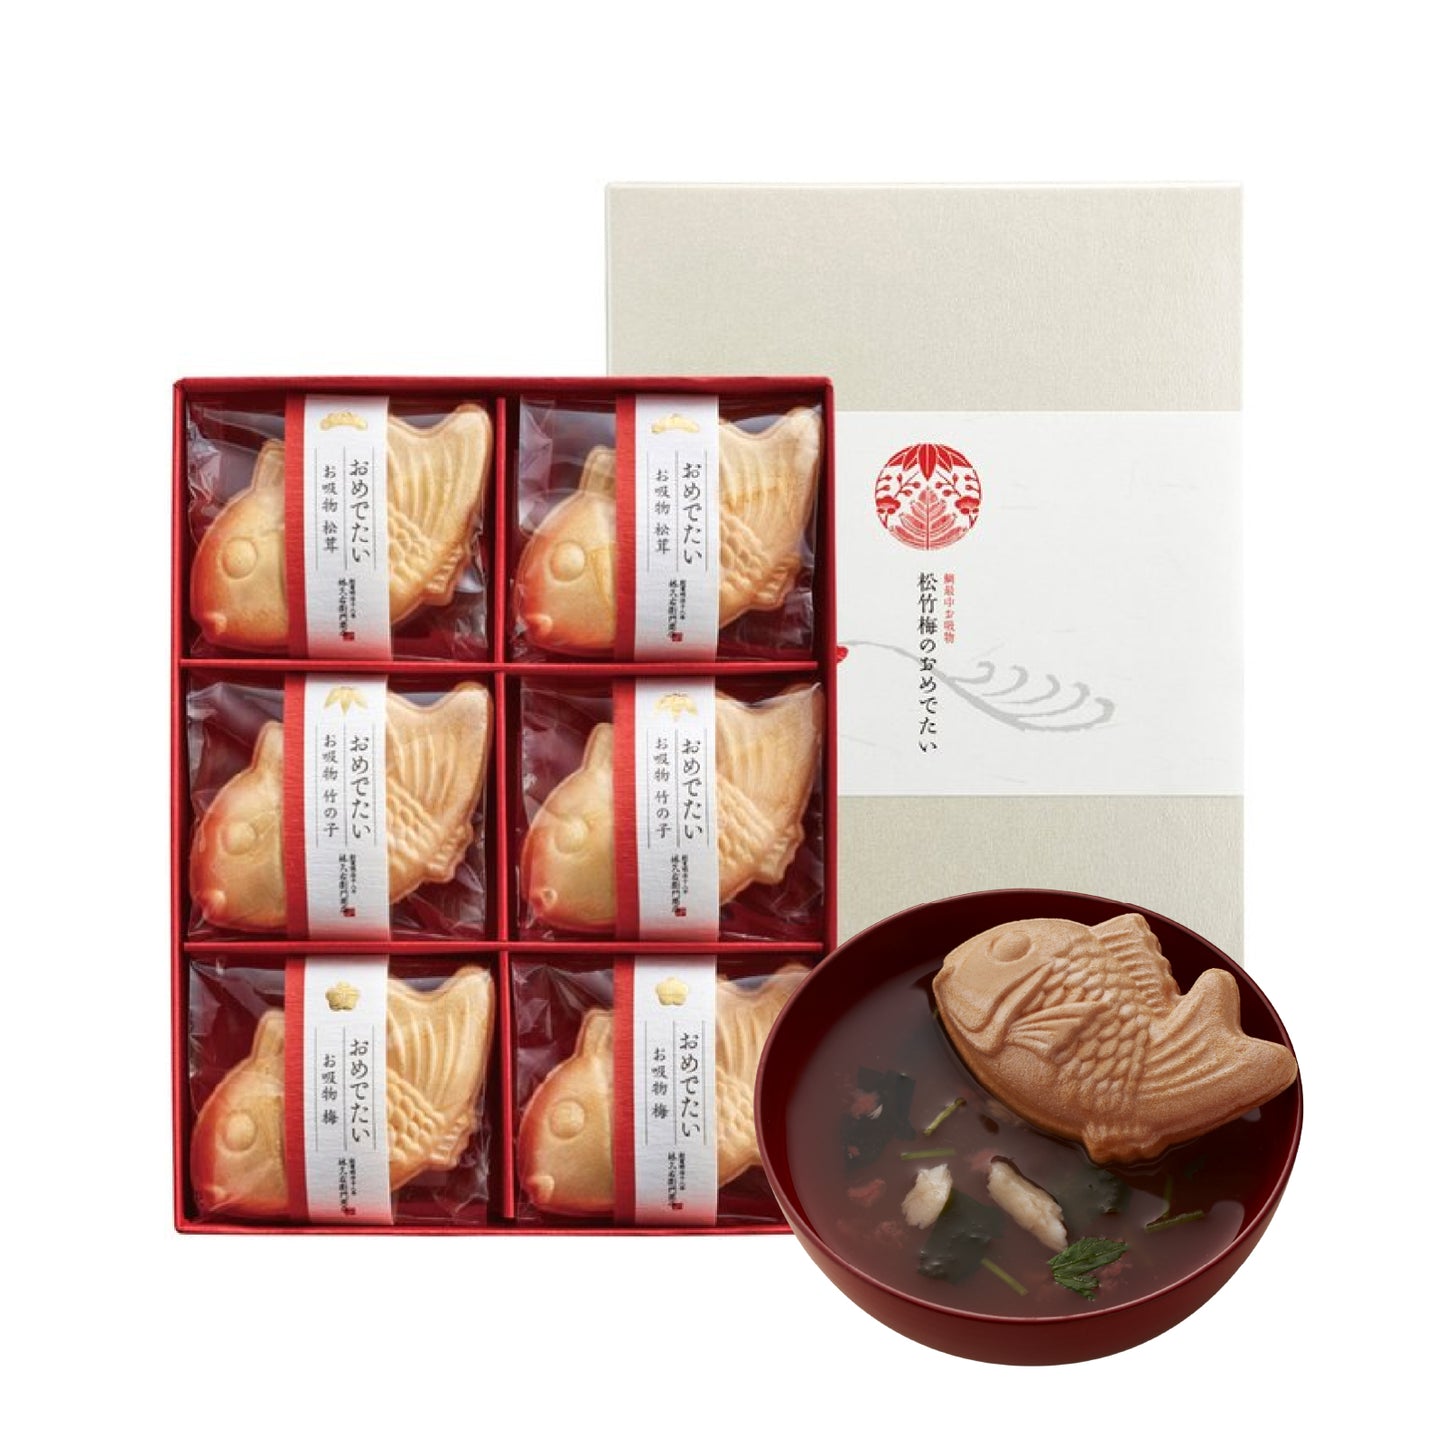 Japanese traditional flavor soups gift pack 6 servings